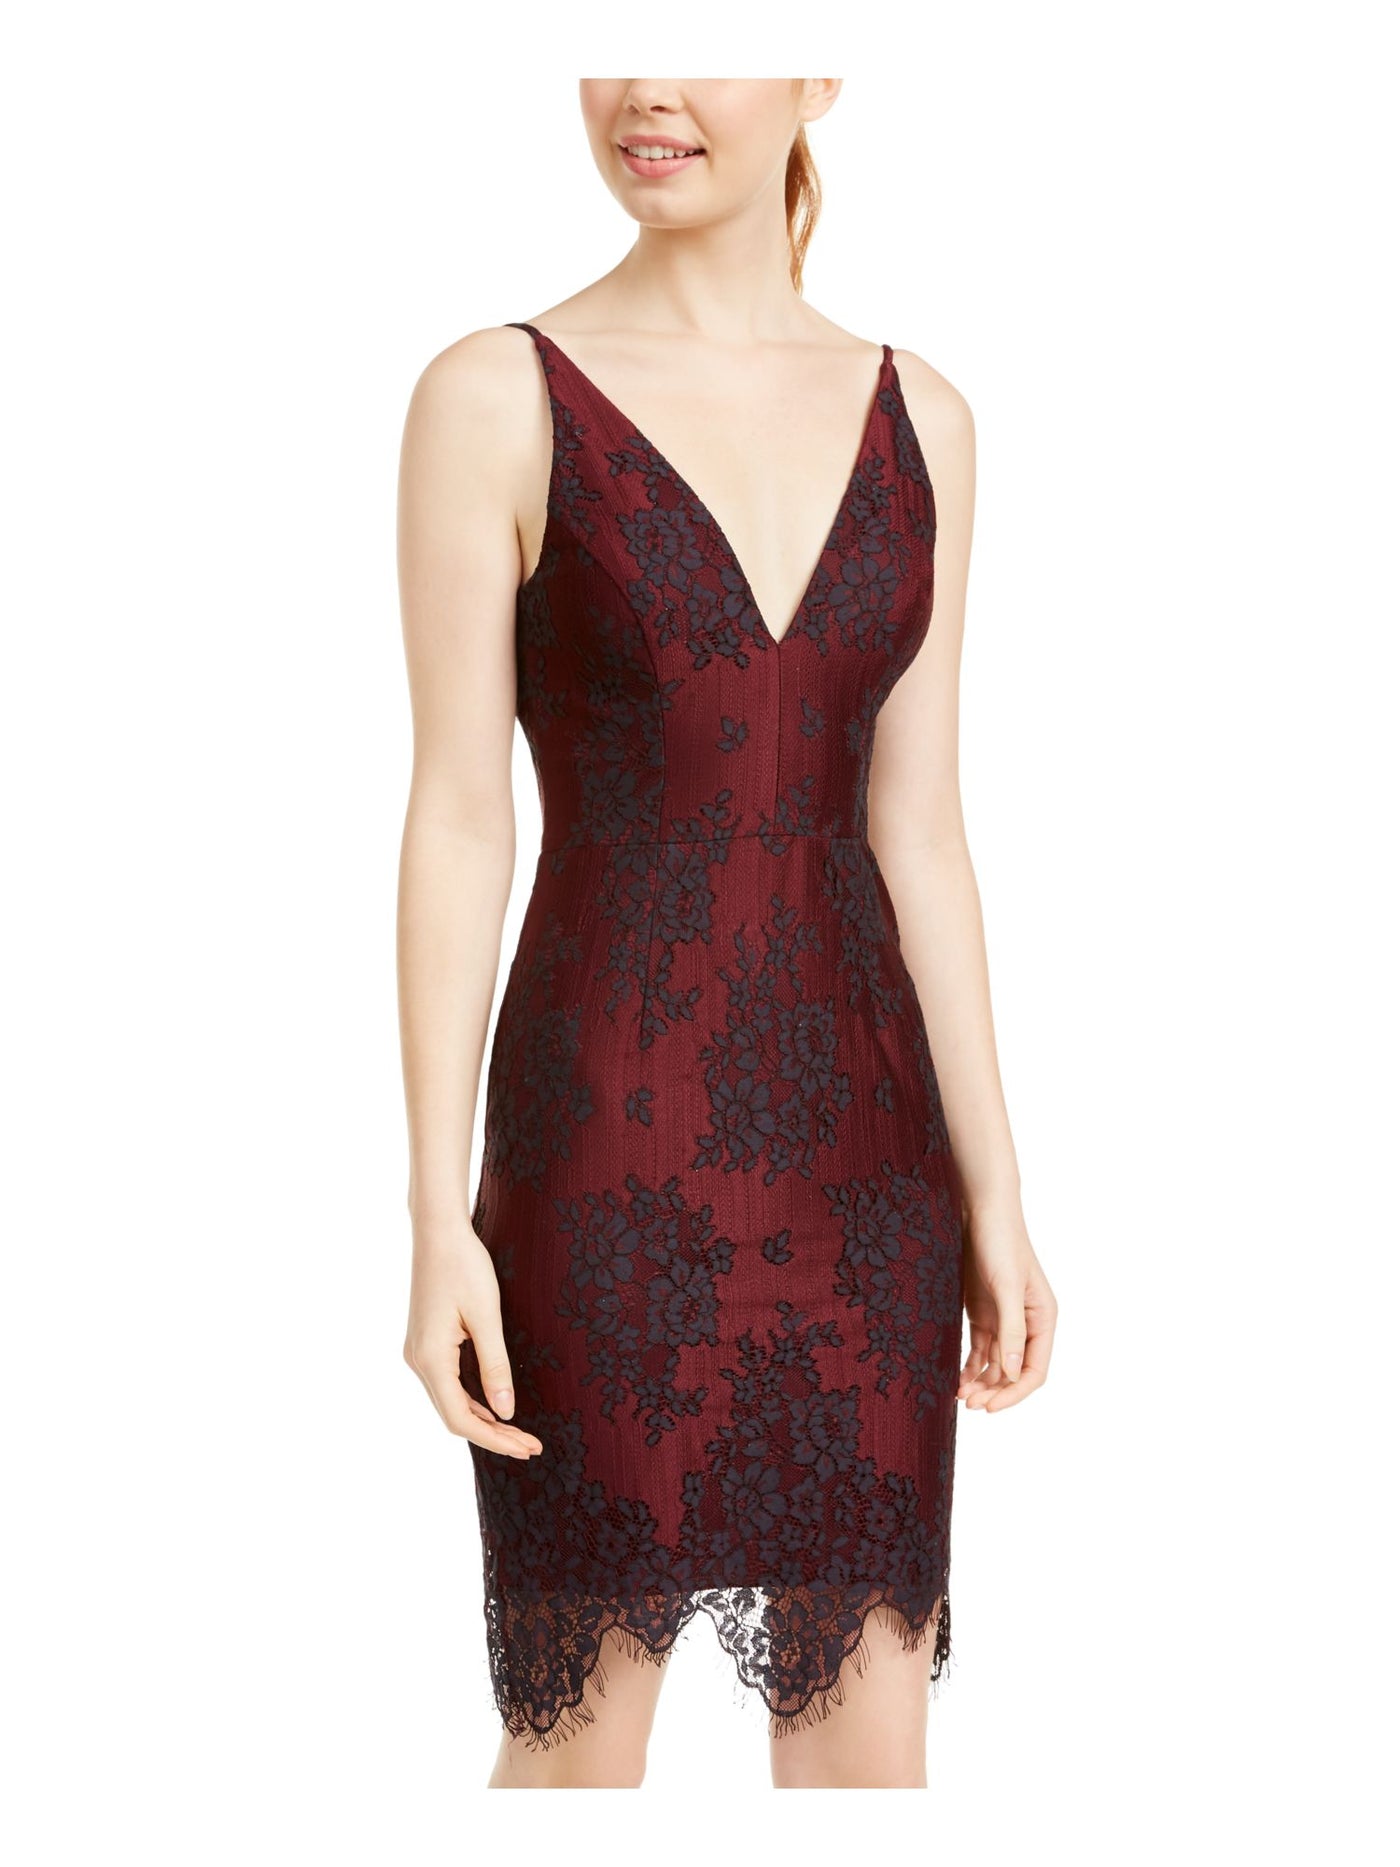 BLONDIE Womens Lace Sleeveless V Neck Above The Knee Party Pencil Dress